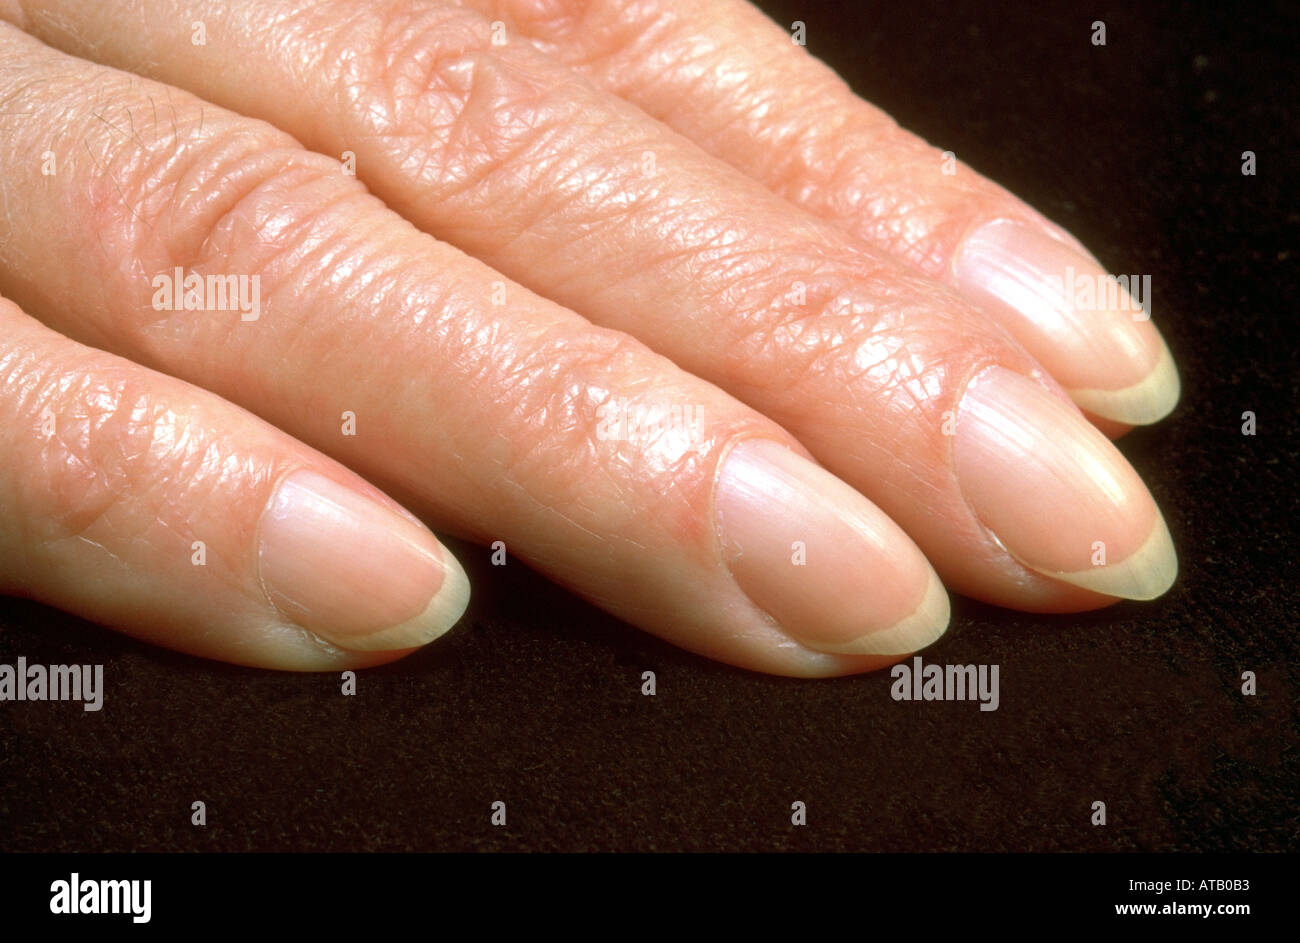 Clubbed Nails High Resolution Stock Photography and Images - Alamy